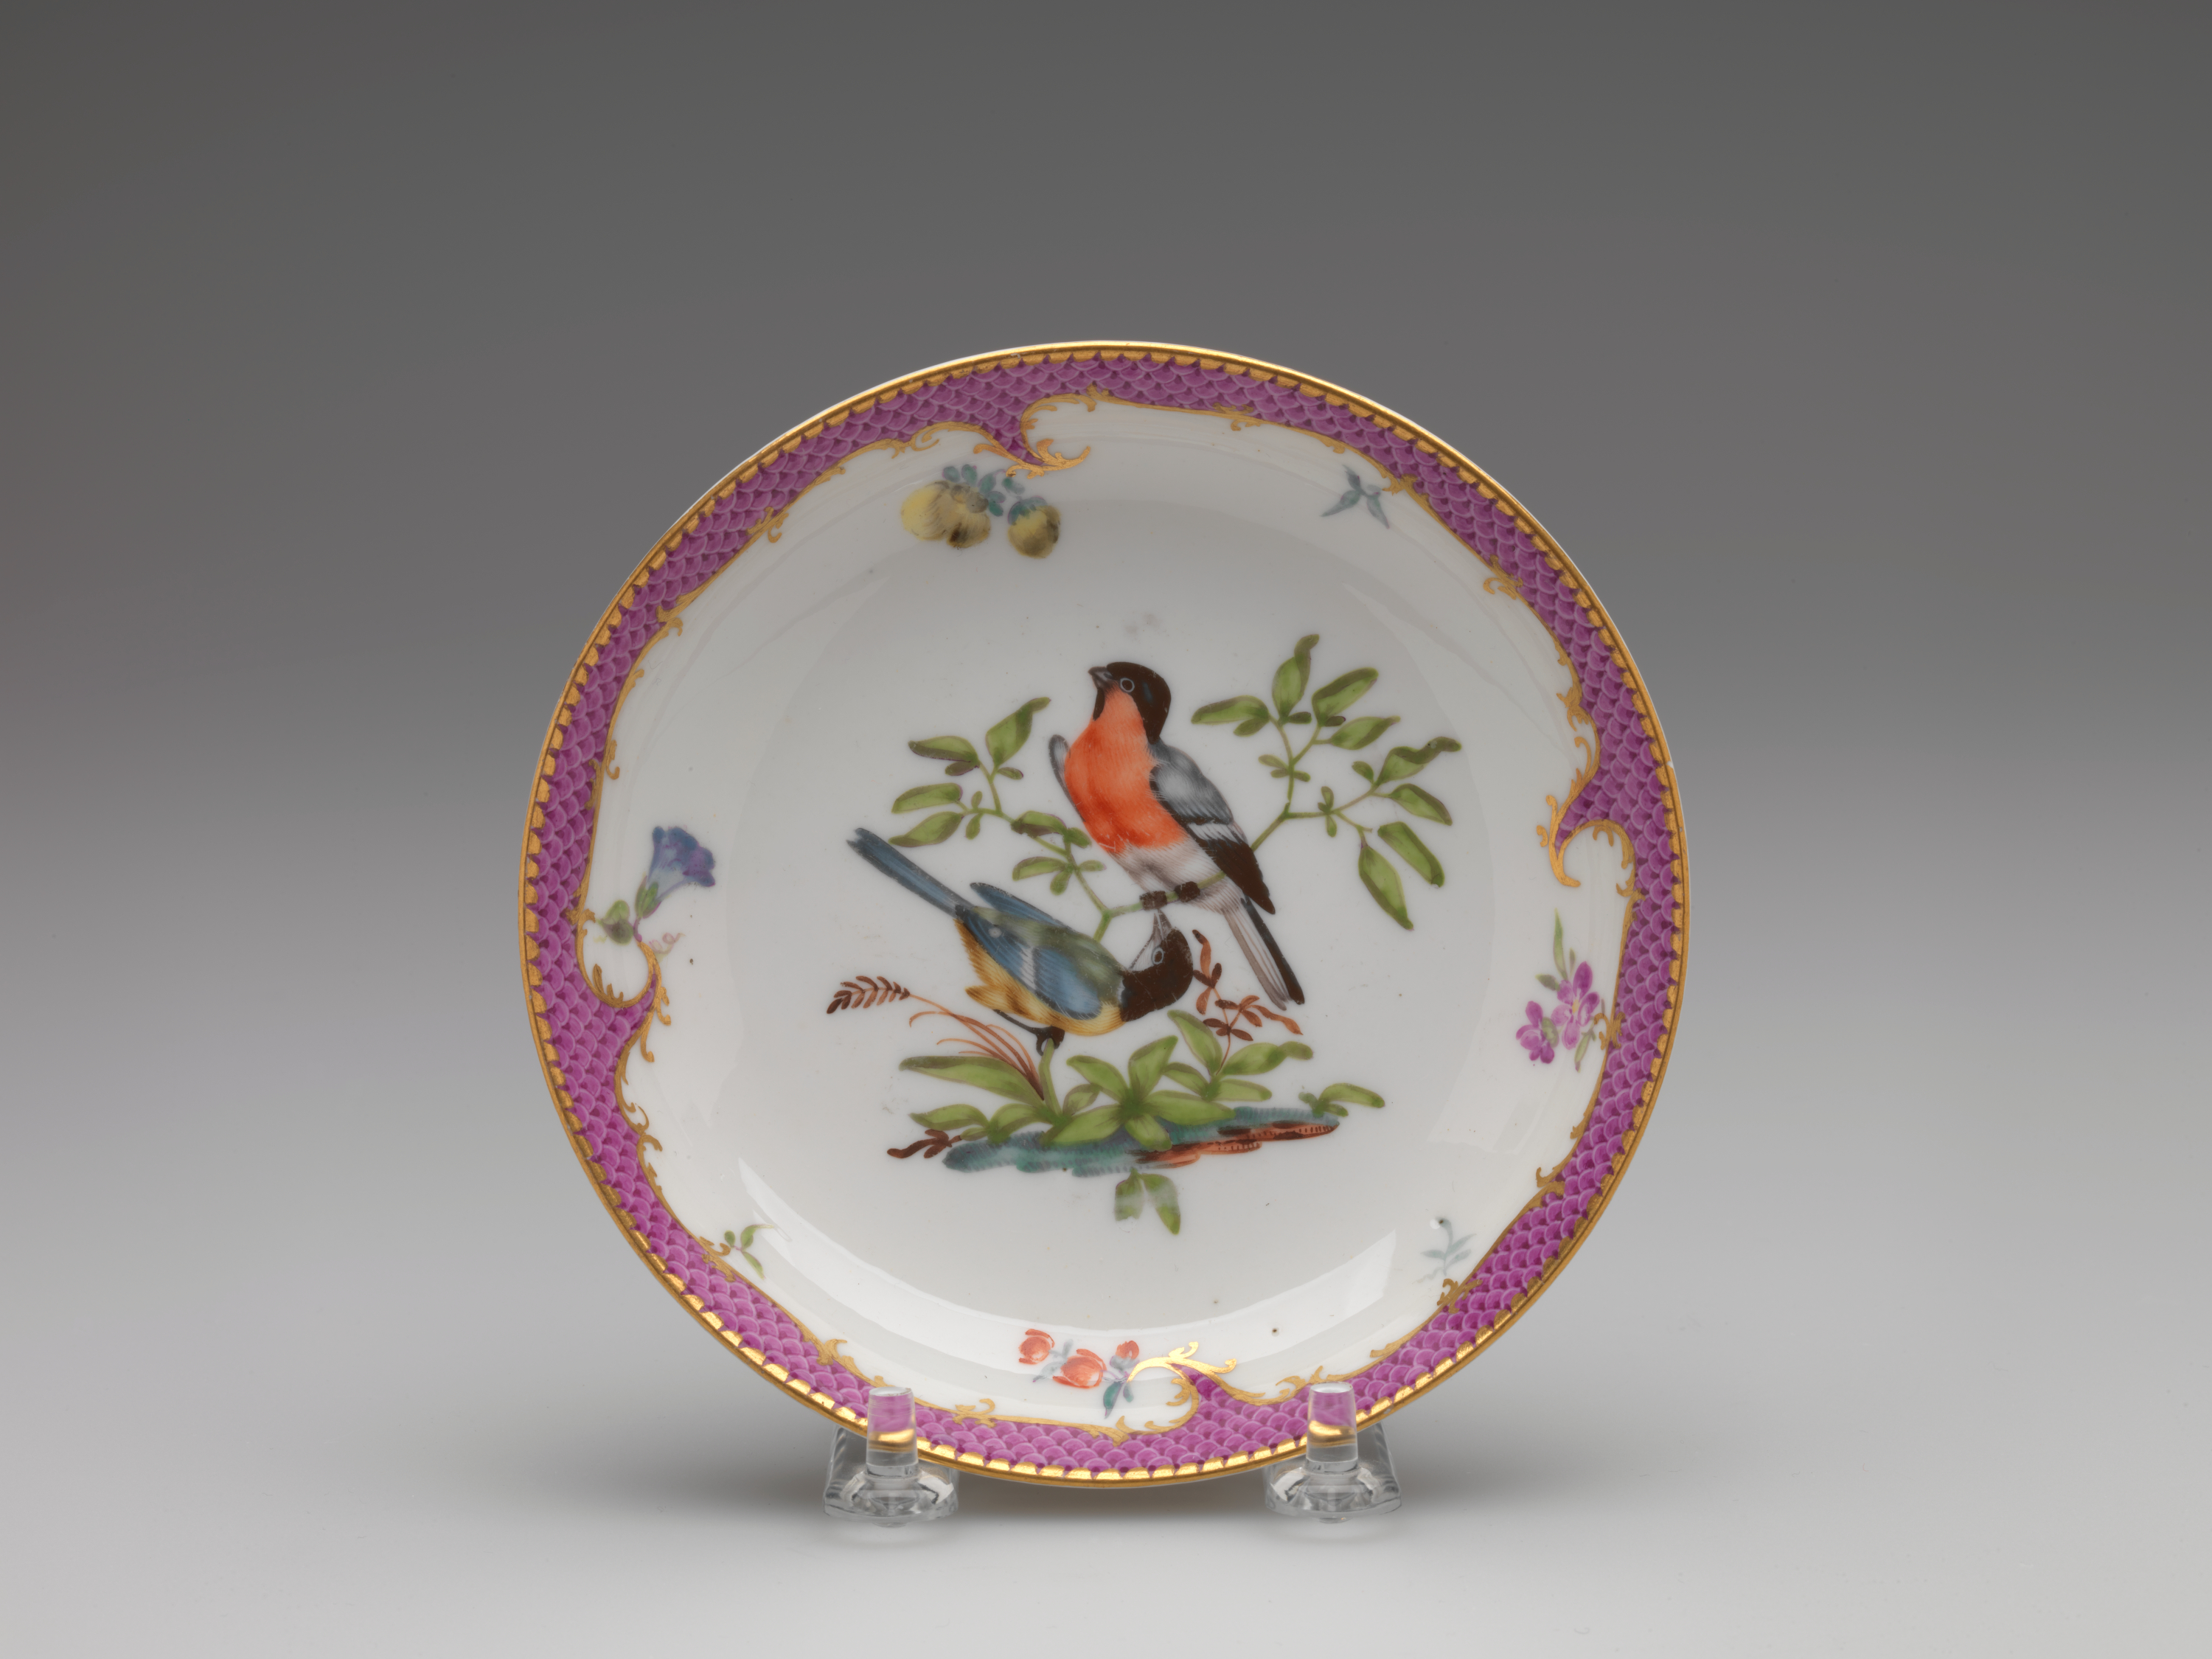 /A%20white%20ceramic%20plate%20with%20a%20gilded%20and%20pink%20edge%2C%20floral%20patterns%2C%20with%20two%20birds%20surrounded%20by%20floral%20elements%2C%20positioned%20on%20branches%2C%20are%20blue%2C%20white%2C%20black%2C%20red%2C%20and%20yellow.